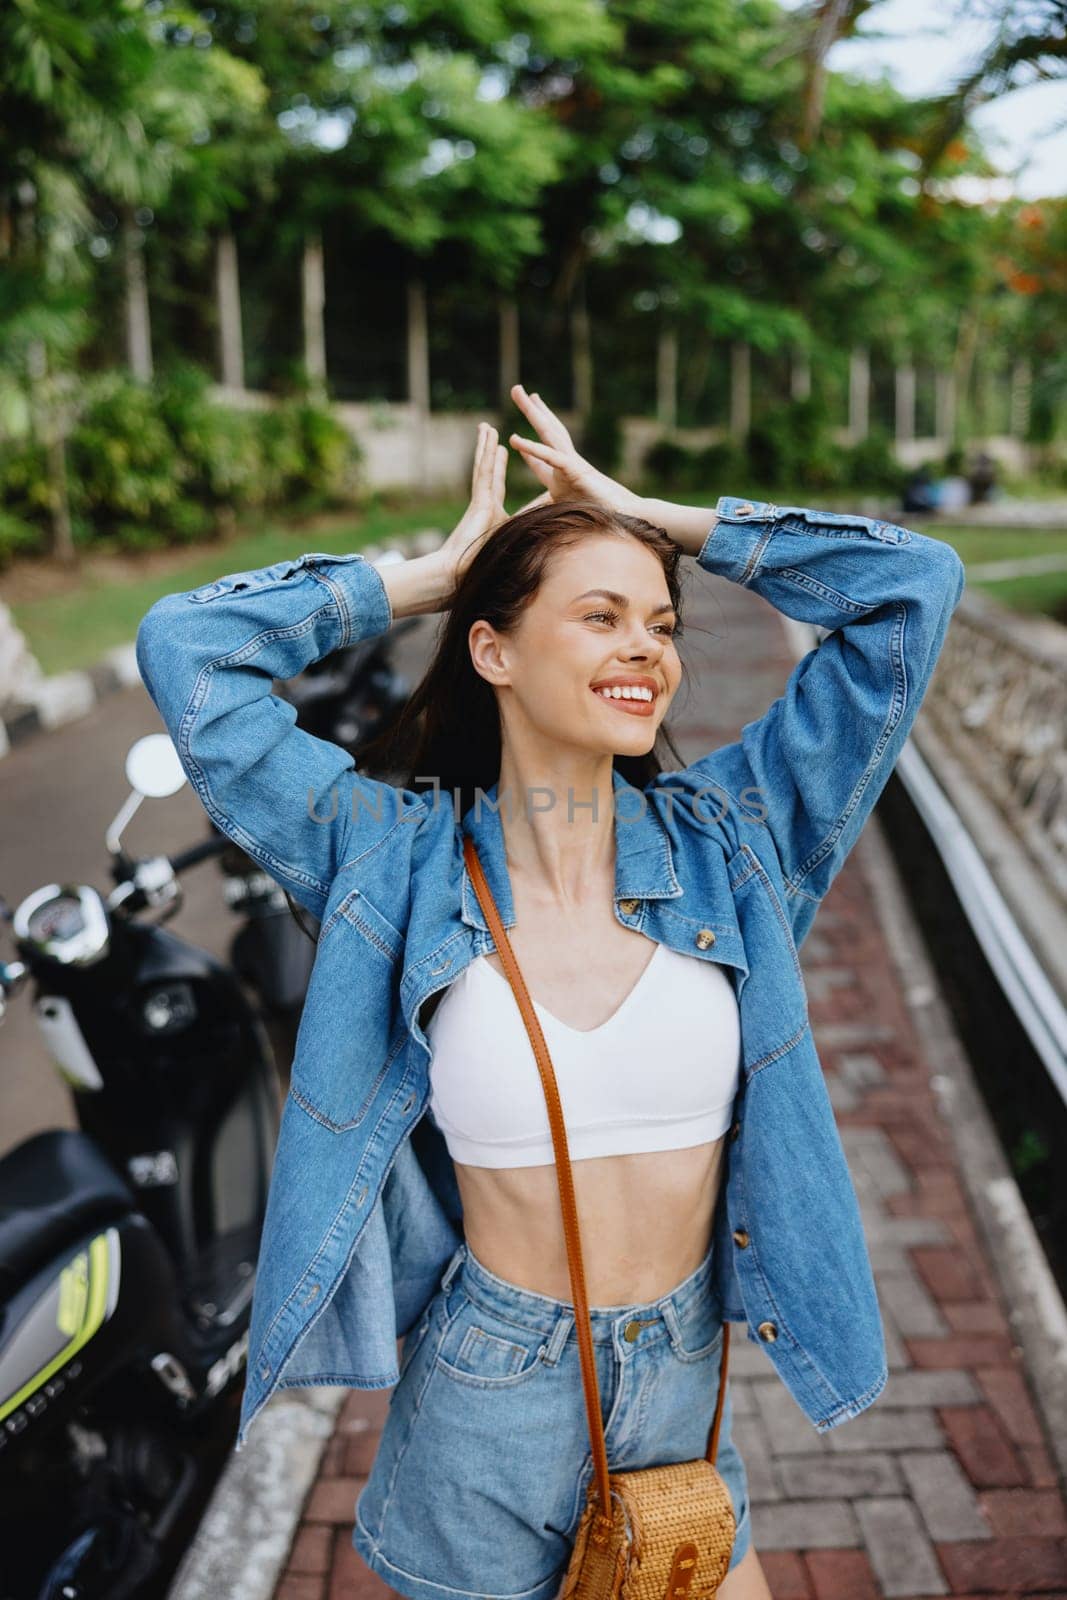 Portrait of a woman brunette smile with teeth walking outside against a backdrop of palm trees in the tropics, summer vacations and outdoor recreation, the carefree lifestyle of a freelance student. High quality photo